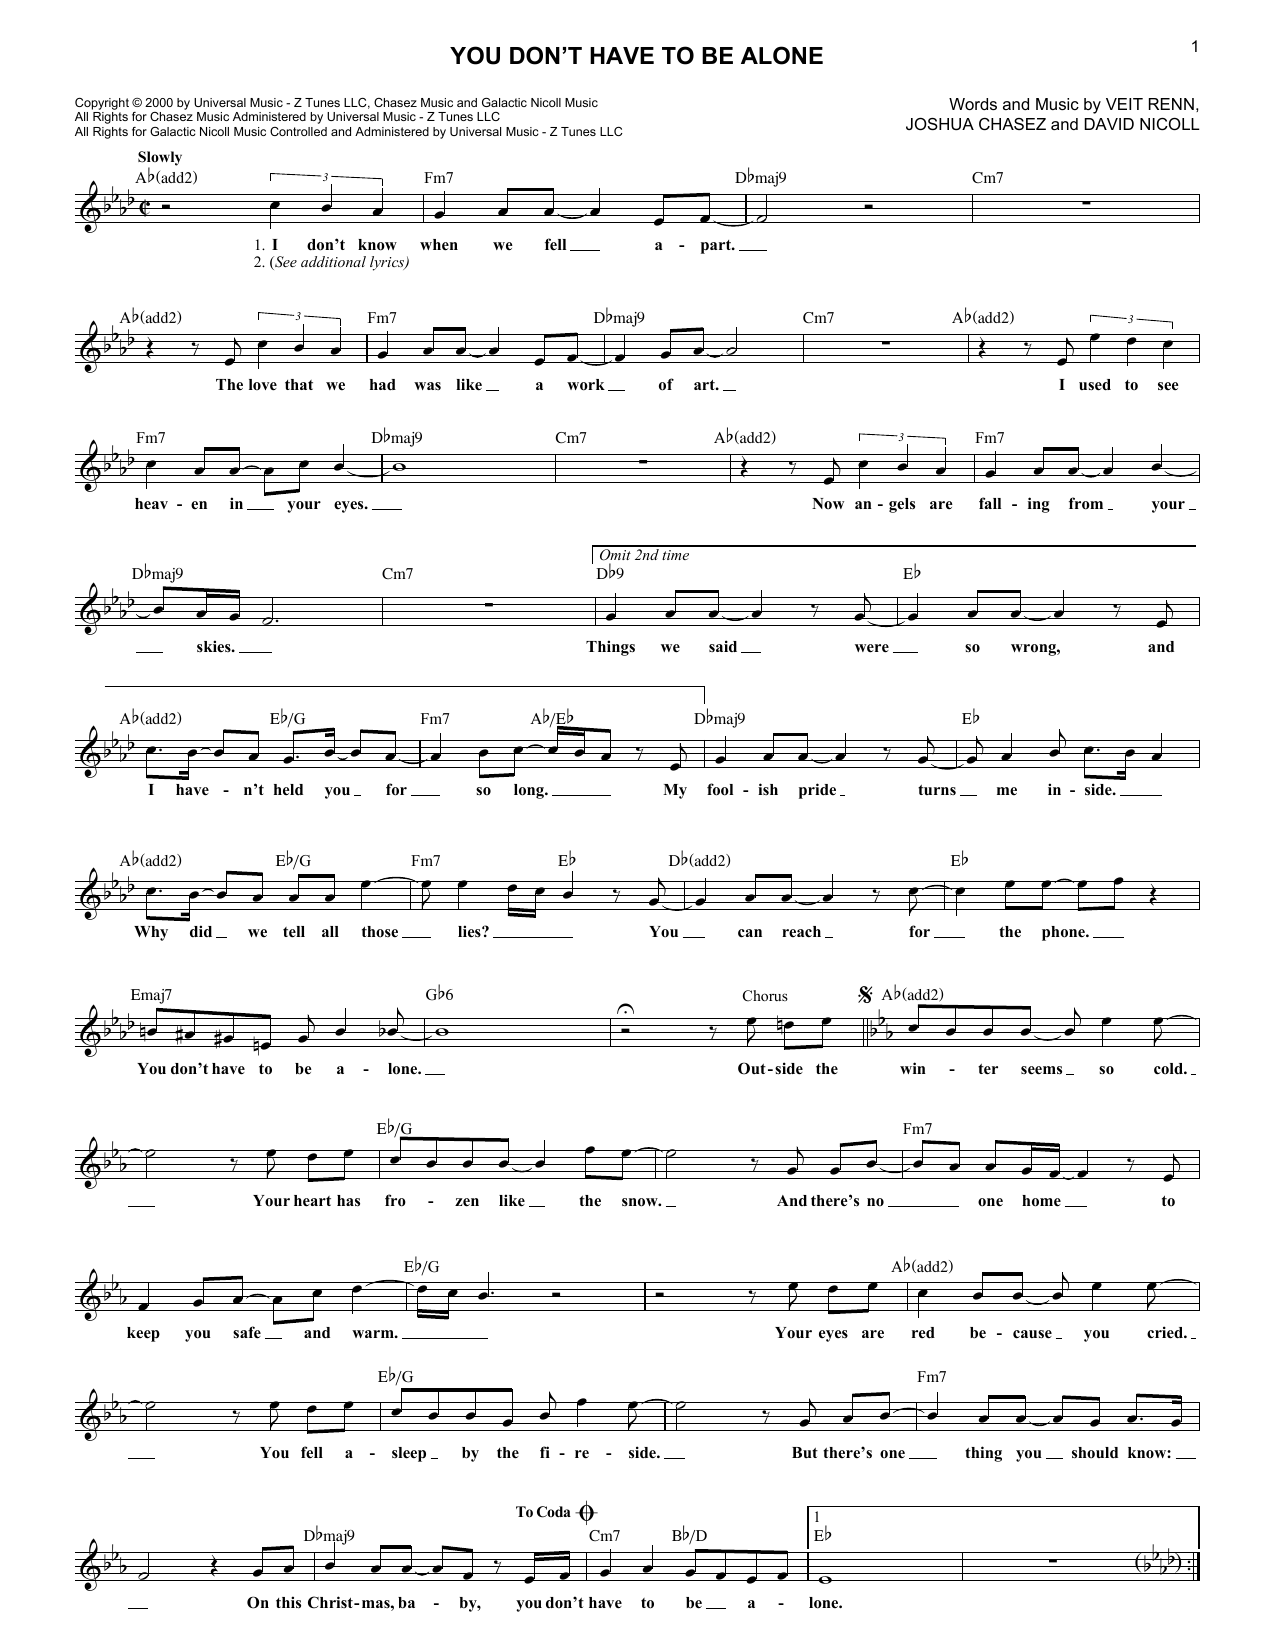 Download 'N Sync You Don't Have To Be Alone Sheet Music